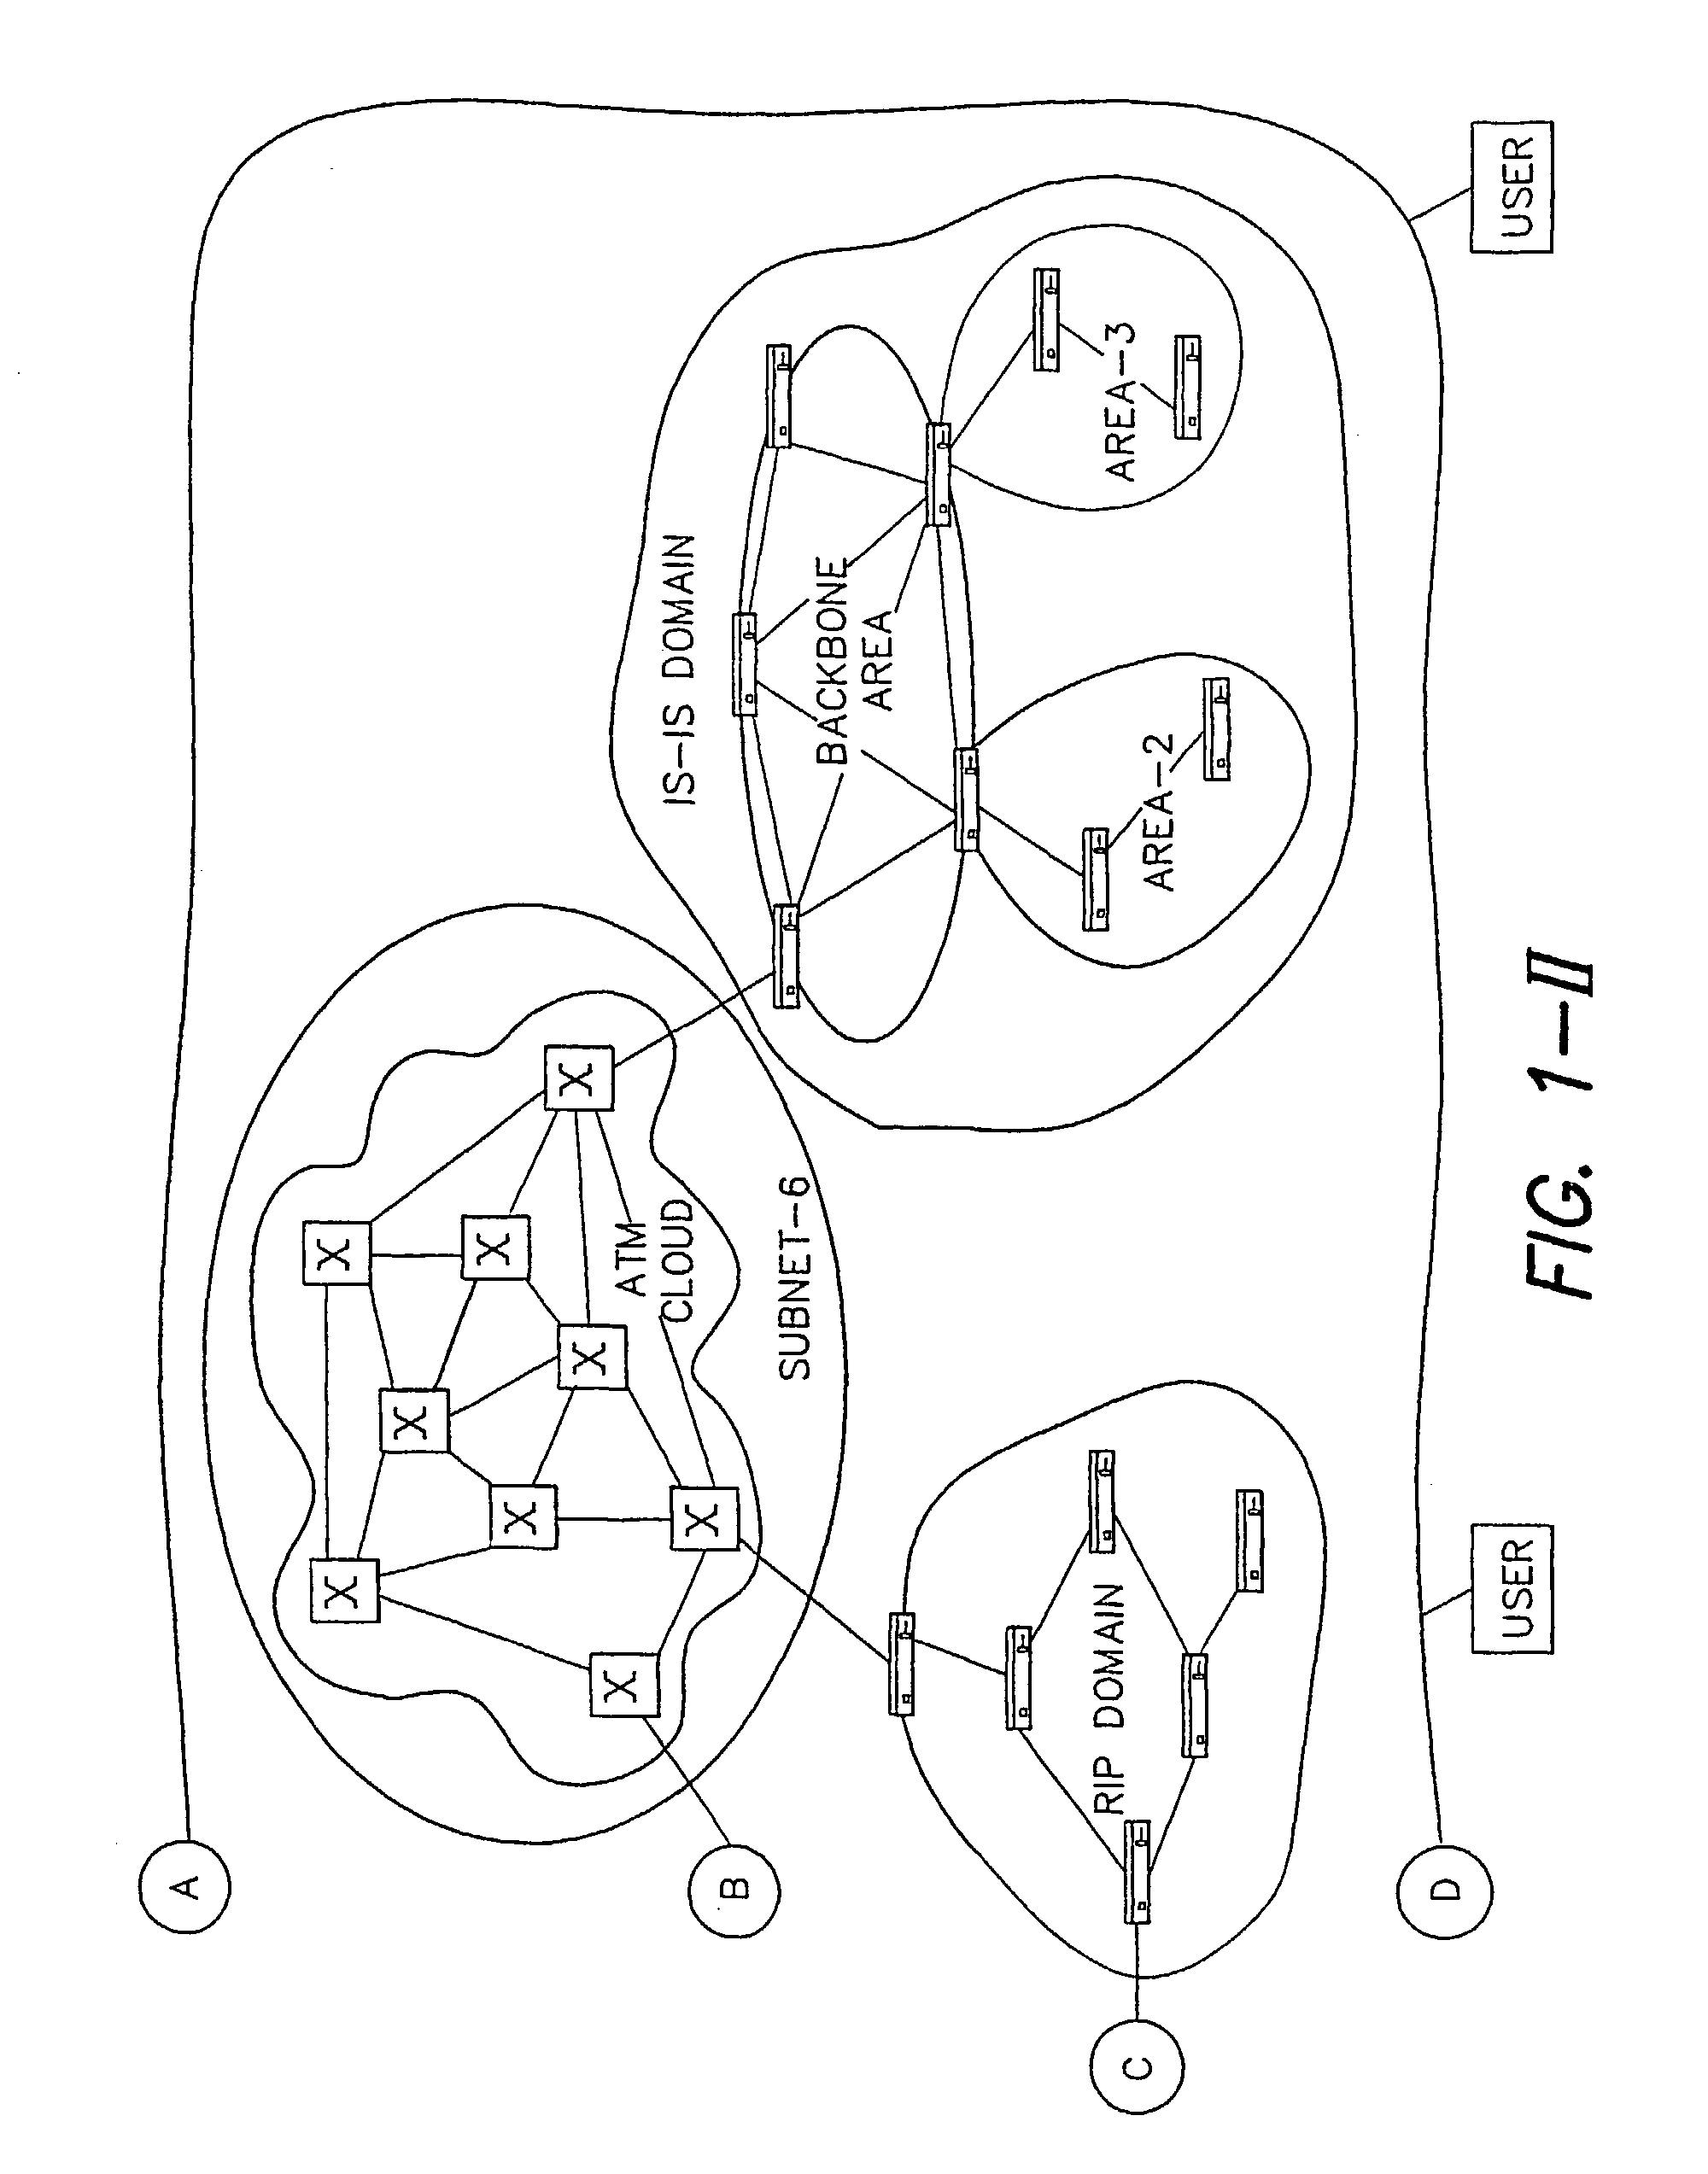 Systems and methods for managing and analyzing faults in computer networks